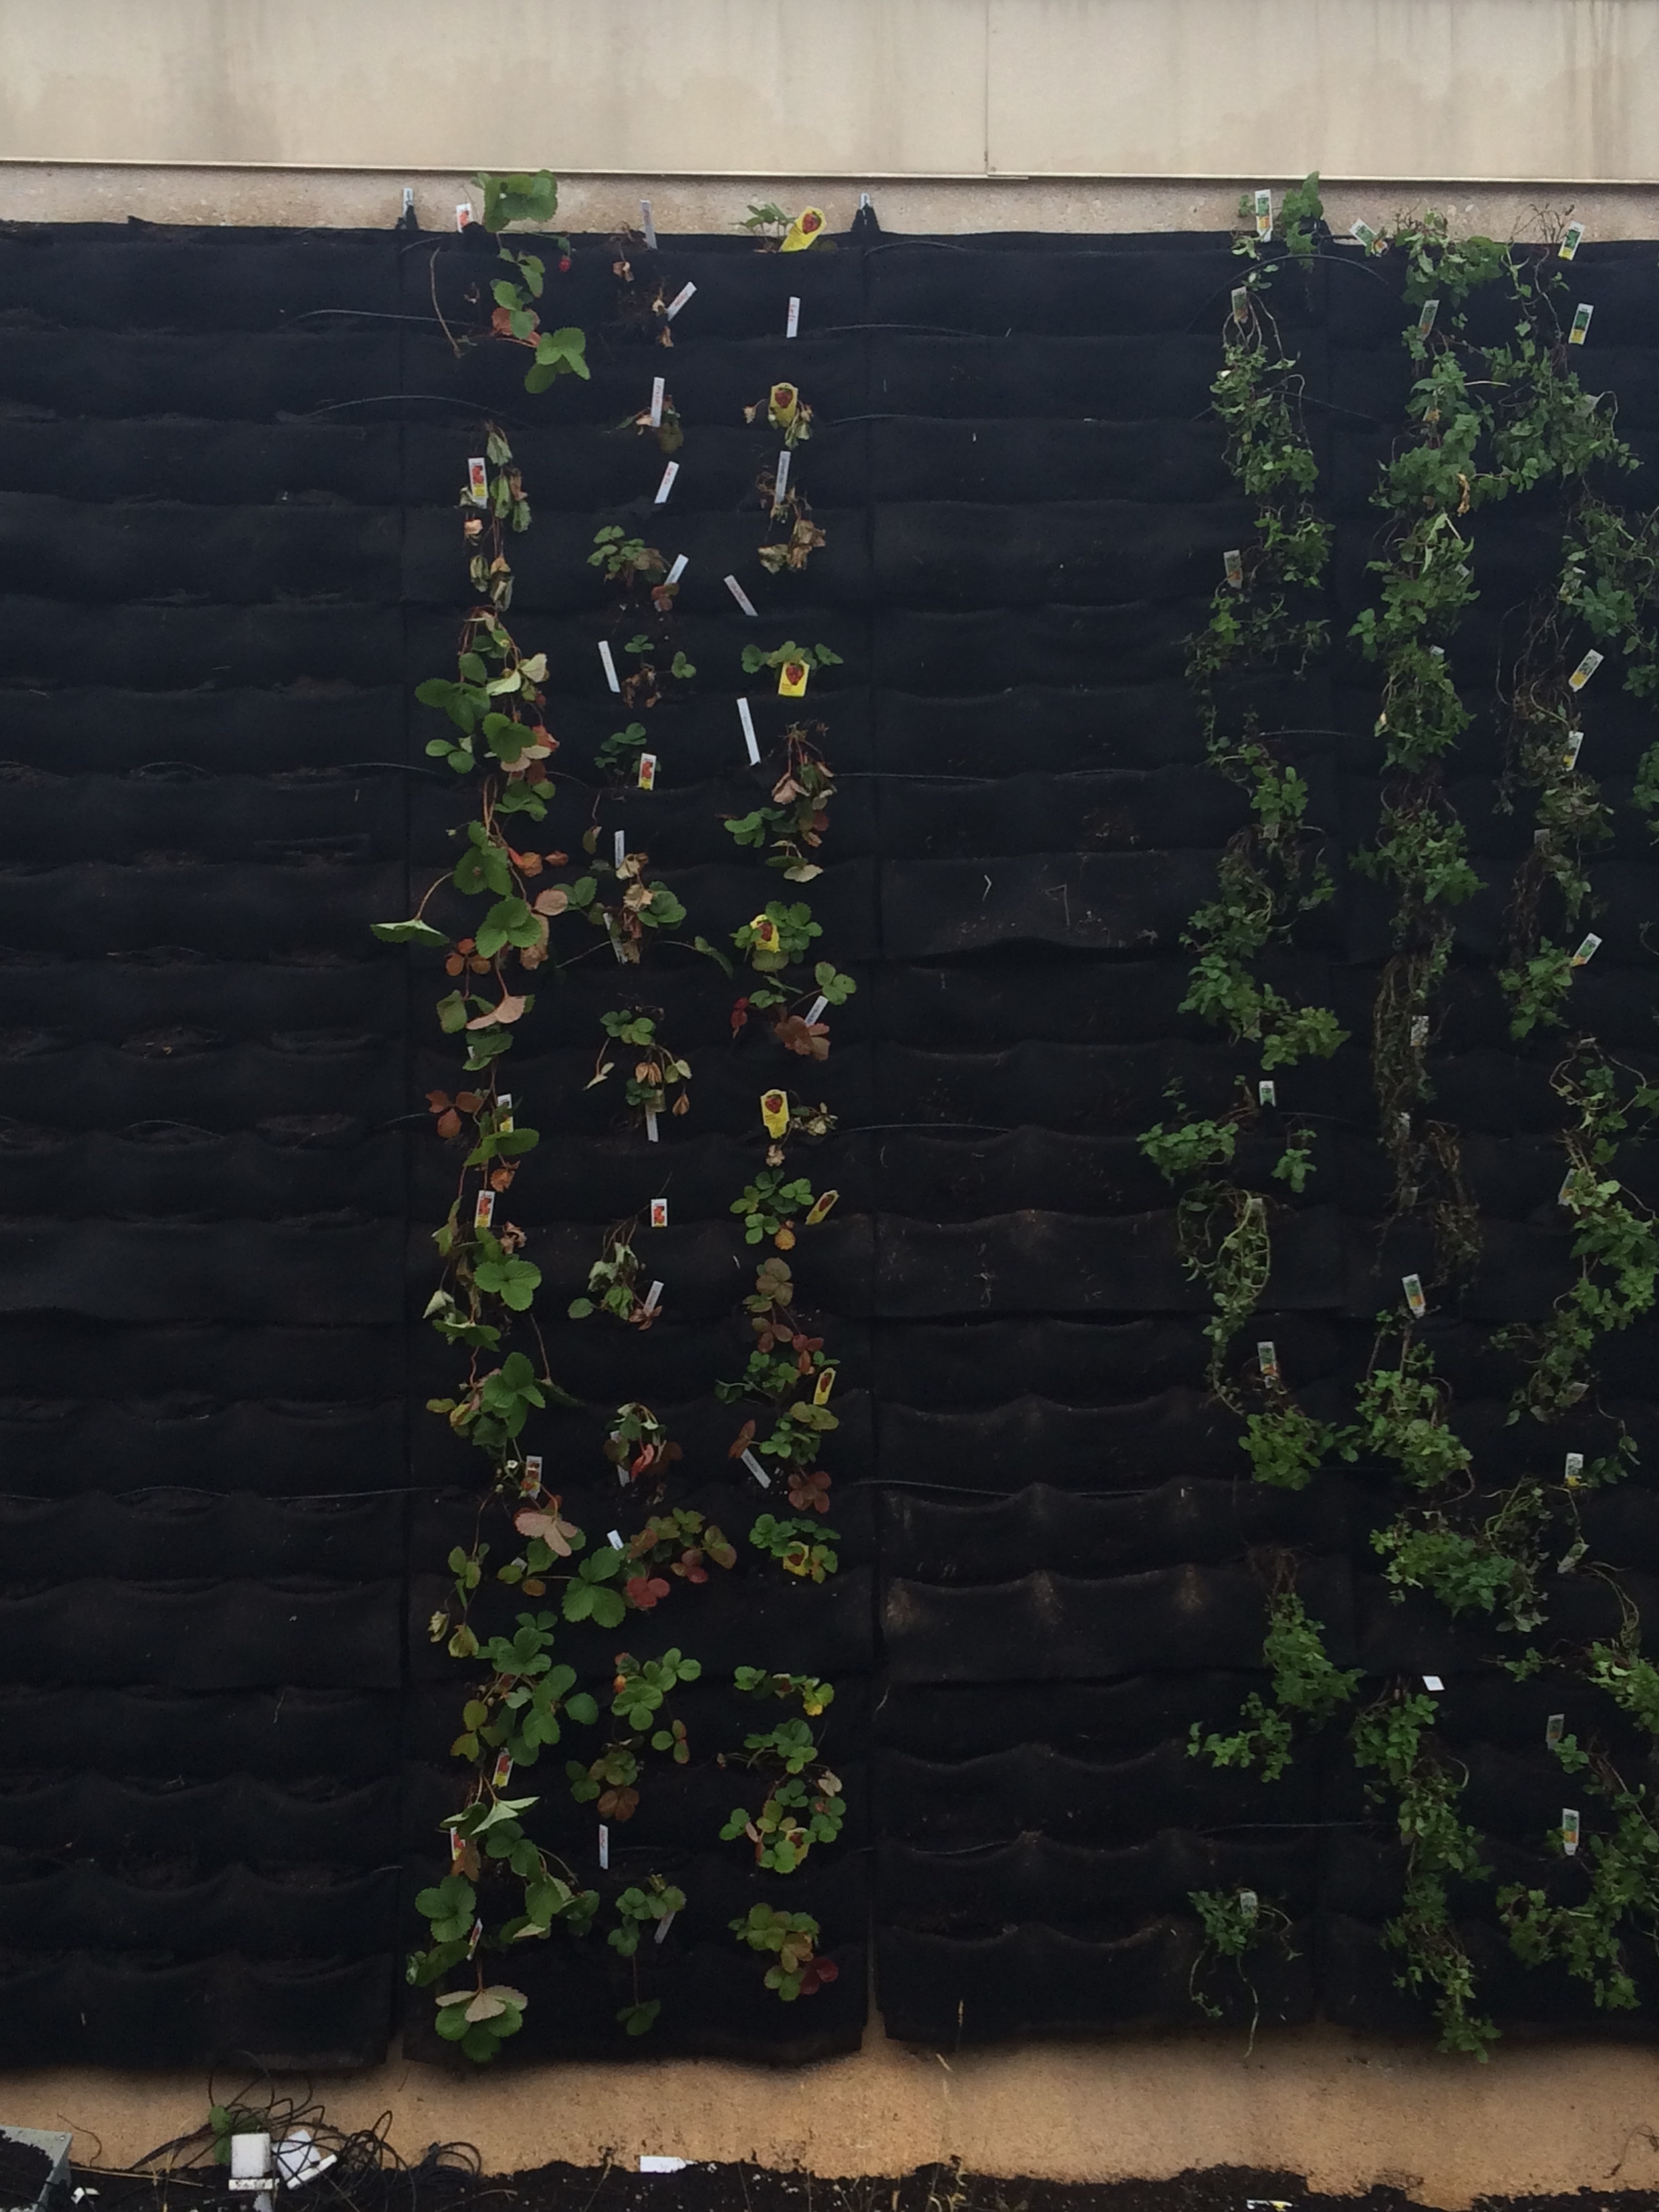 Living Wall | Texas A&M's Green Roof Project